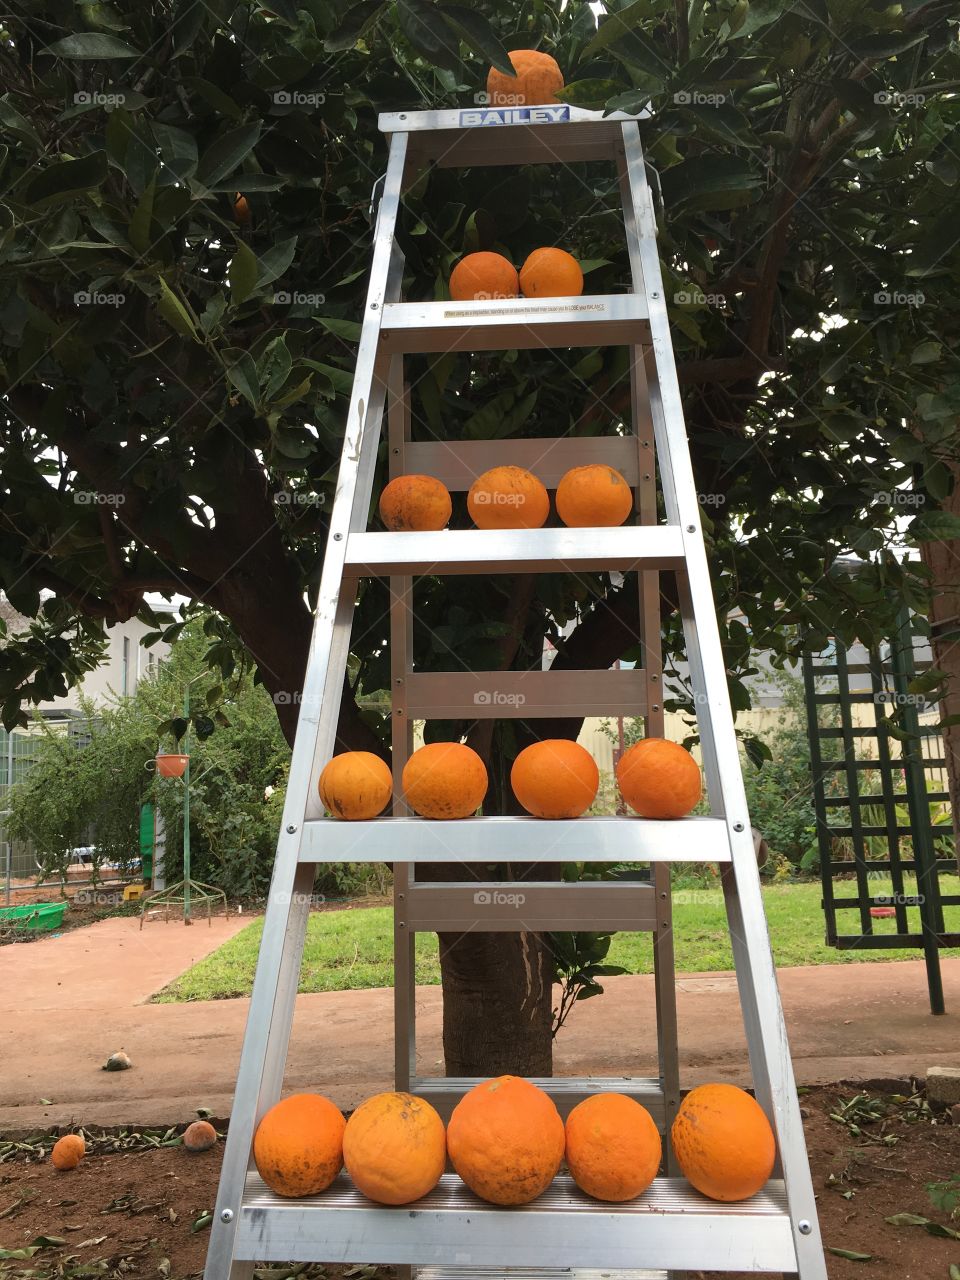 Picking the last of the oranges 